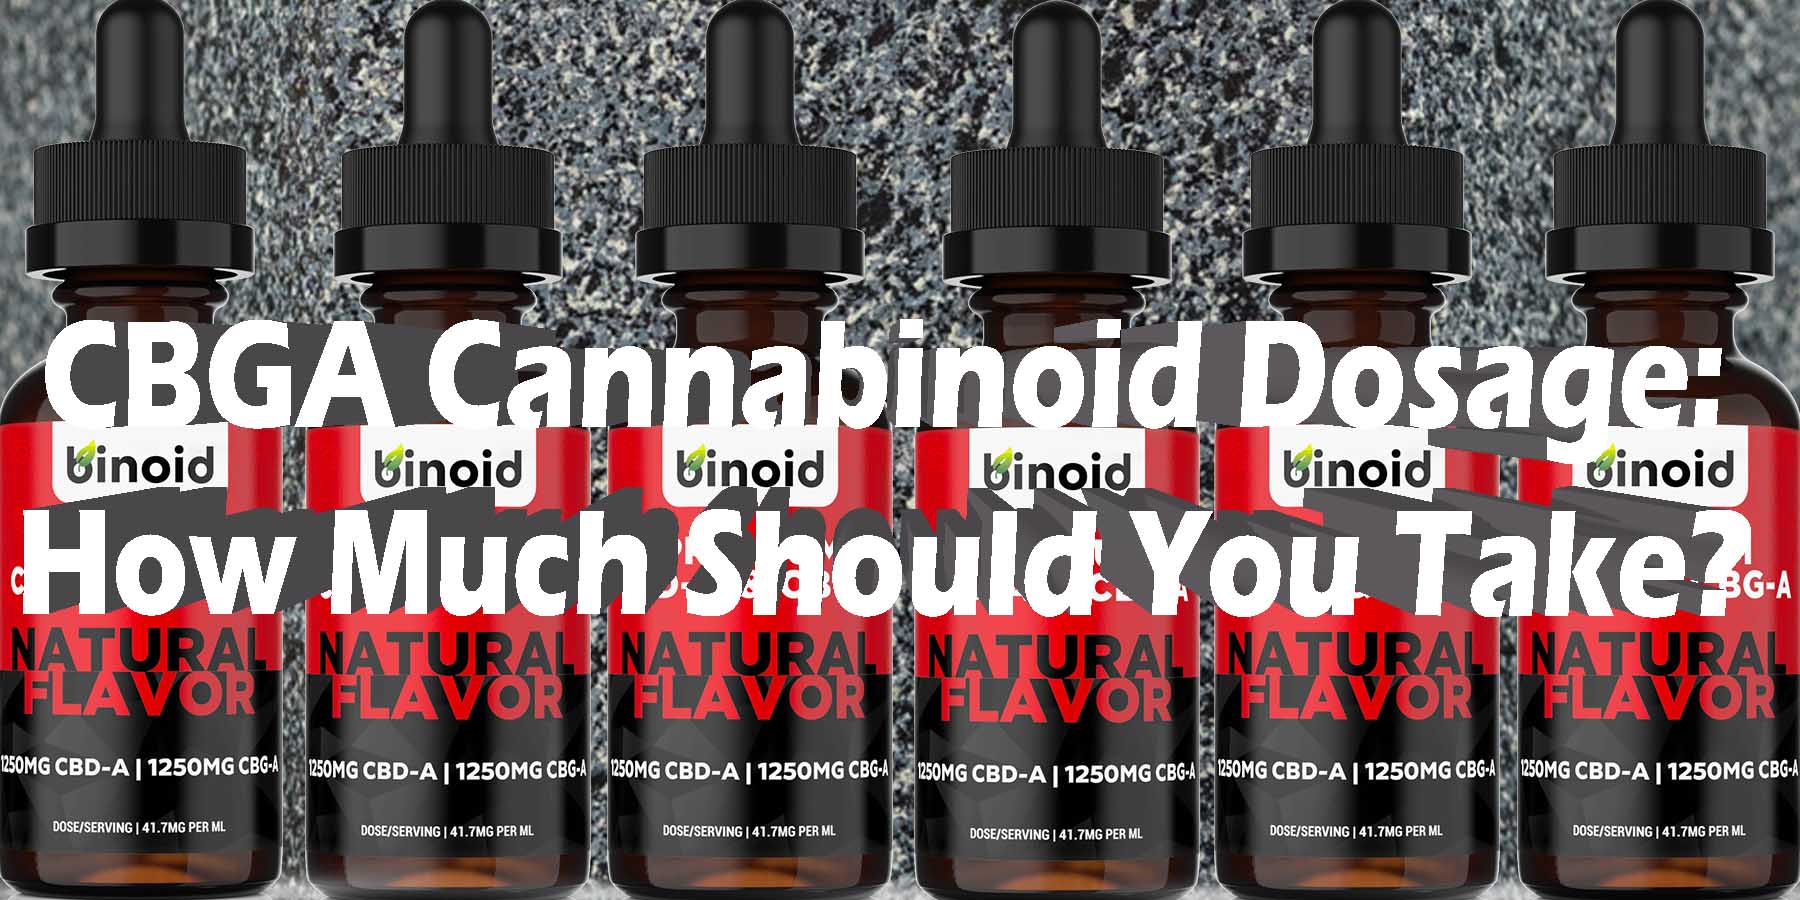 CBGA Cannabinoid Dosage How Much Should You Take Discount For Smoking High Smoke Shop Online Near Me Strongest Binoid Buy Online BestPlace LowestPrice Coupon Binoid.